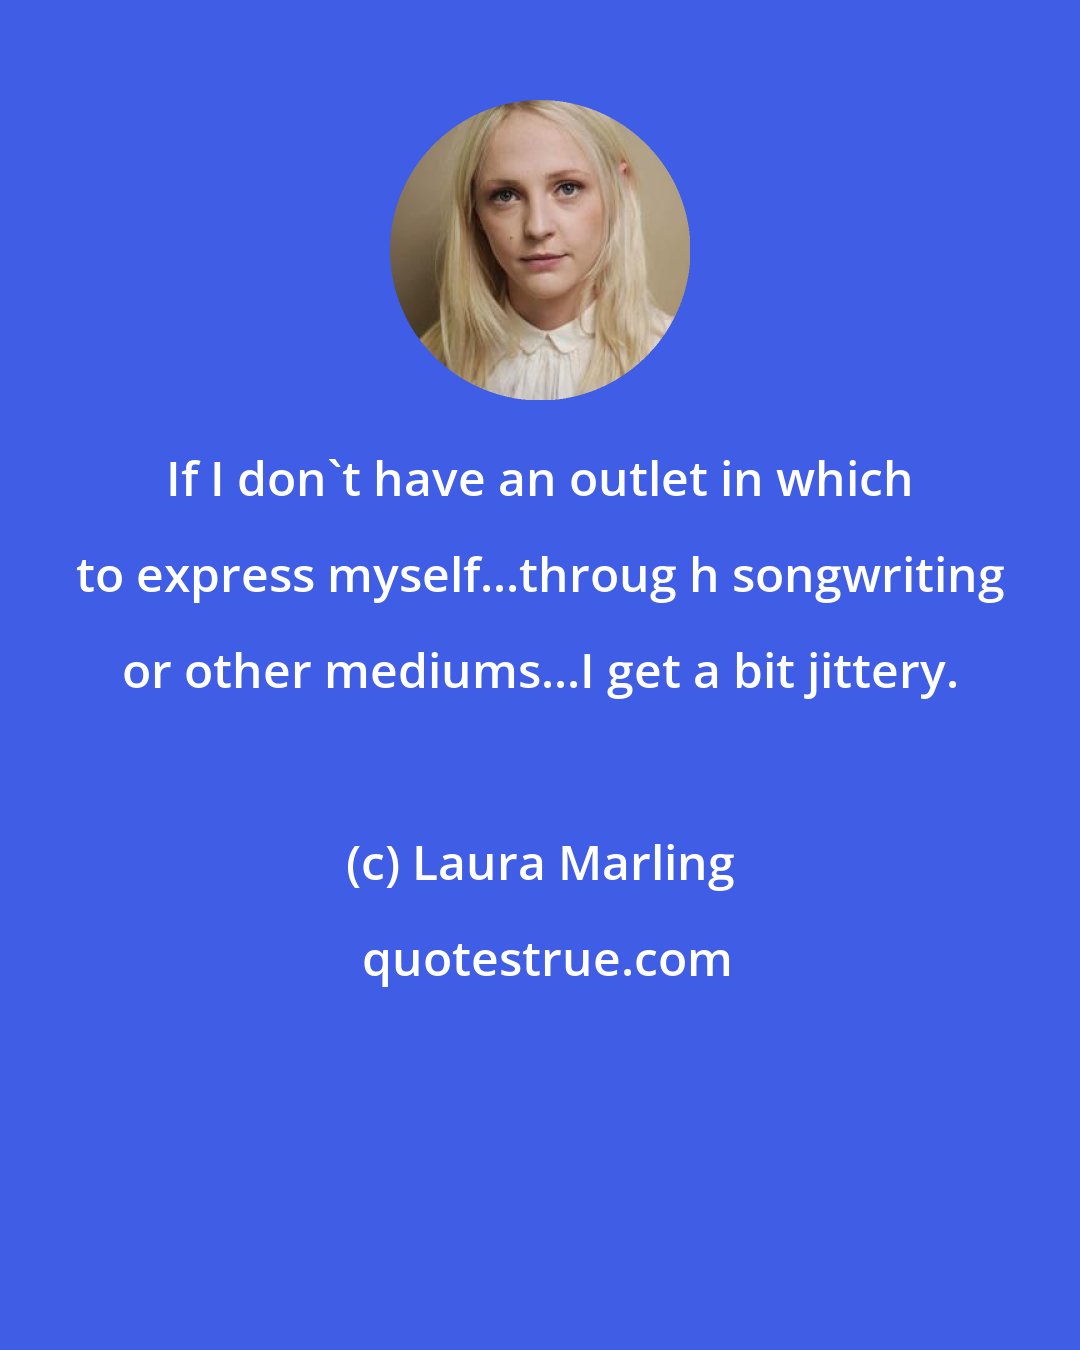 Laura Marling: If I don't have an outlet in which to express myself...throug h songwriting or other mediums...I get a bit jittery.